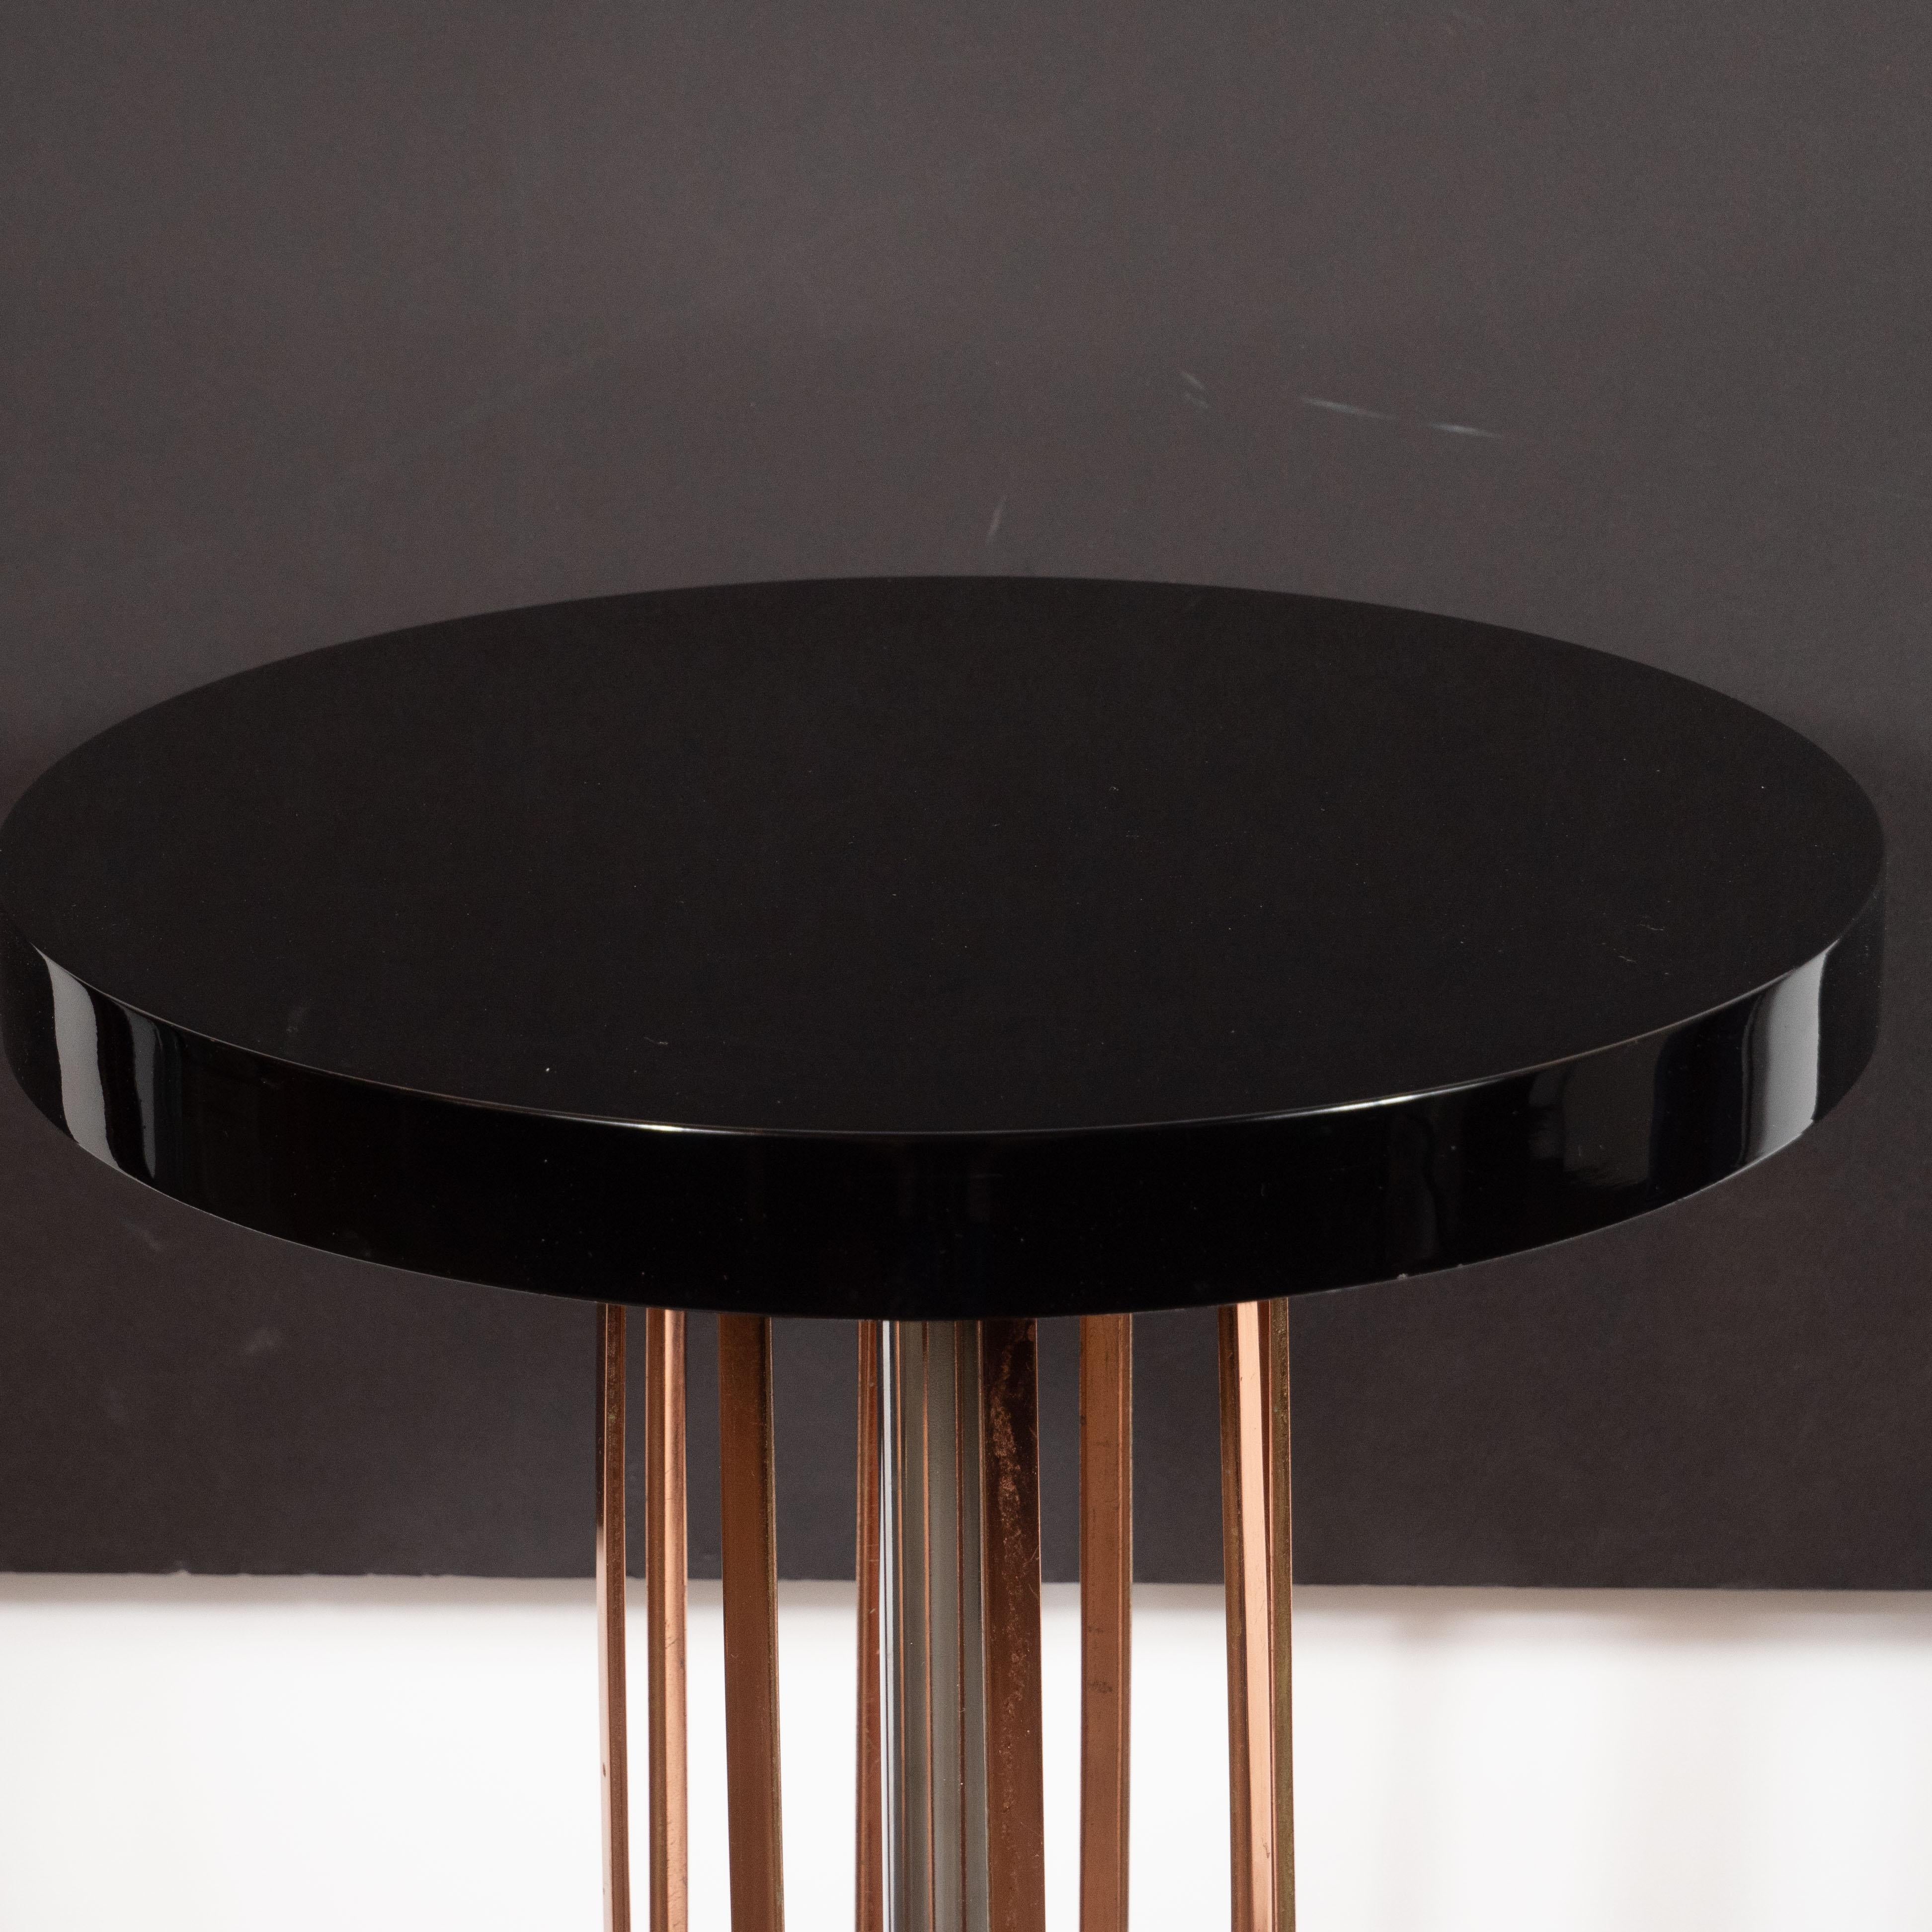 This stunning side/ drinks table was realized in the United States, circa 1935. It features a circular skyscraper chrome base with four streamlined reeded black enamel feet peaking out from beneath. There is a circular copper plate secured to the